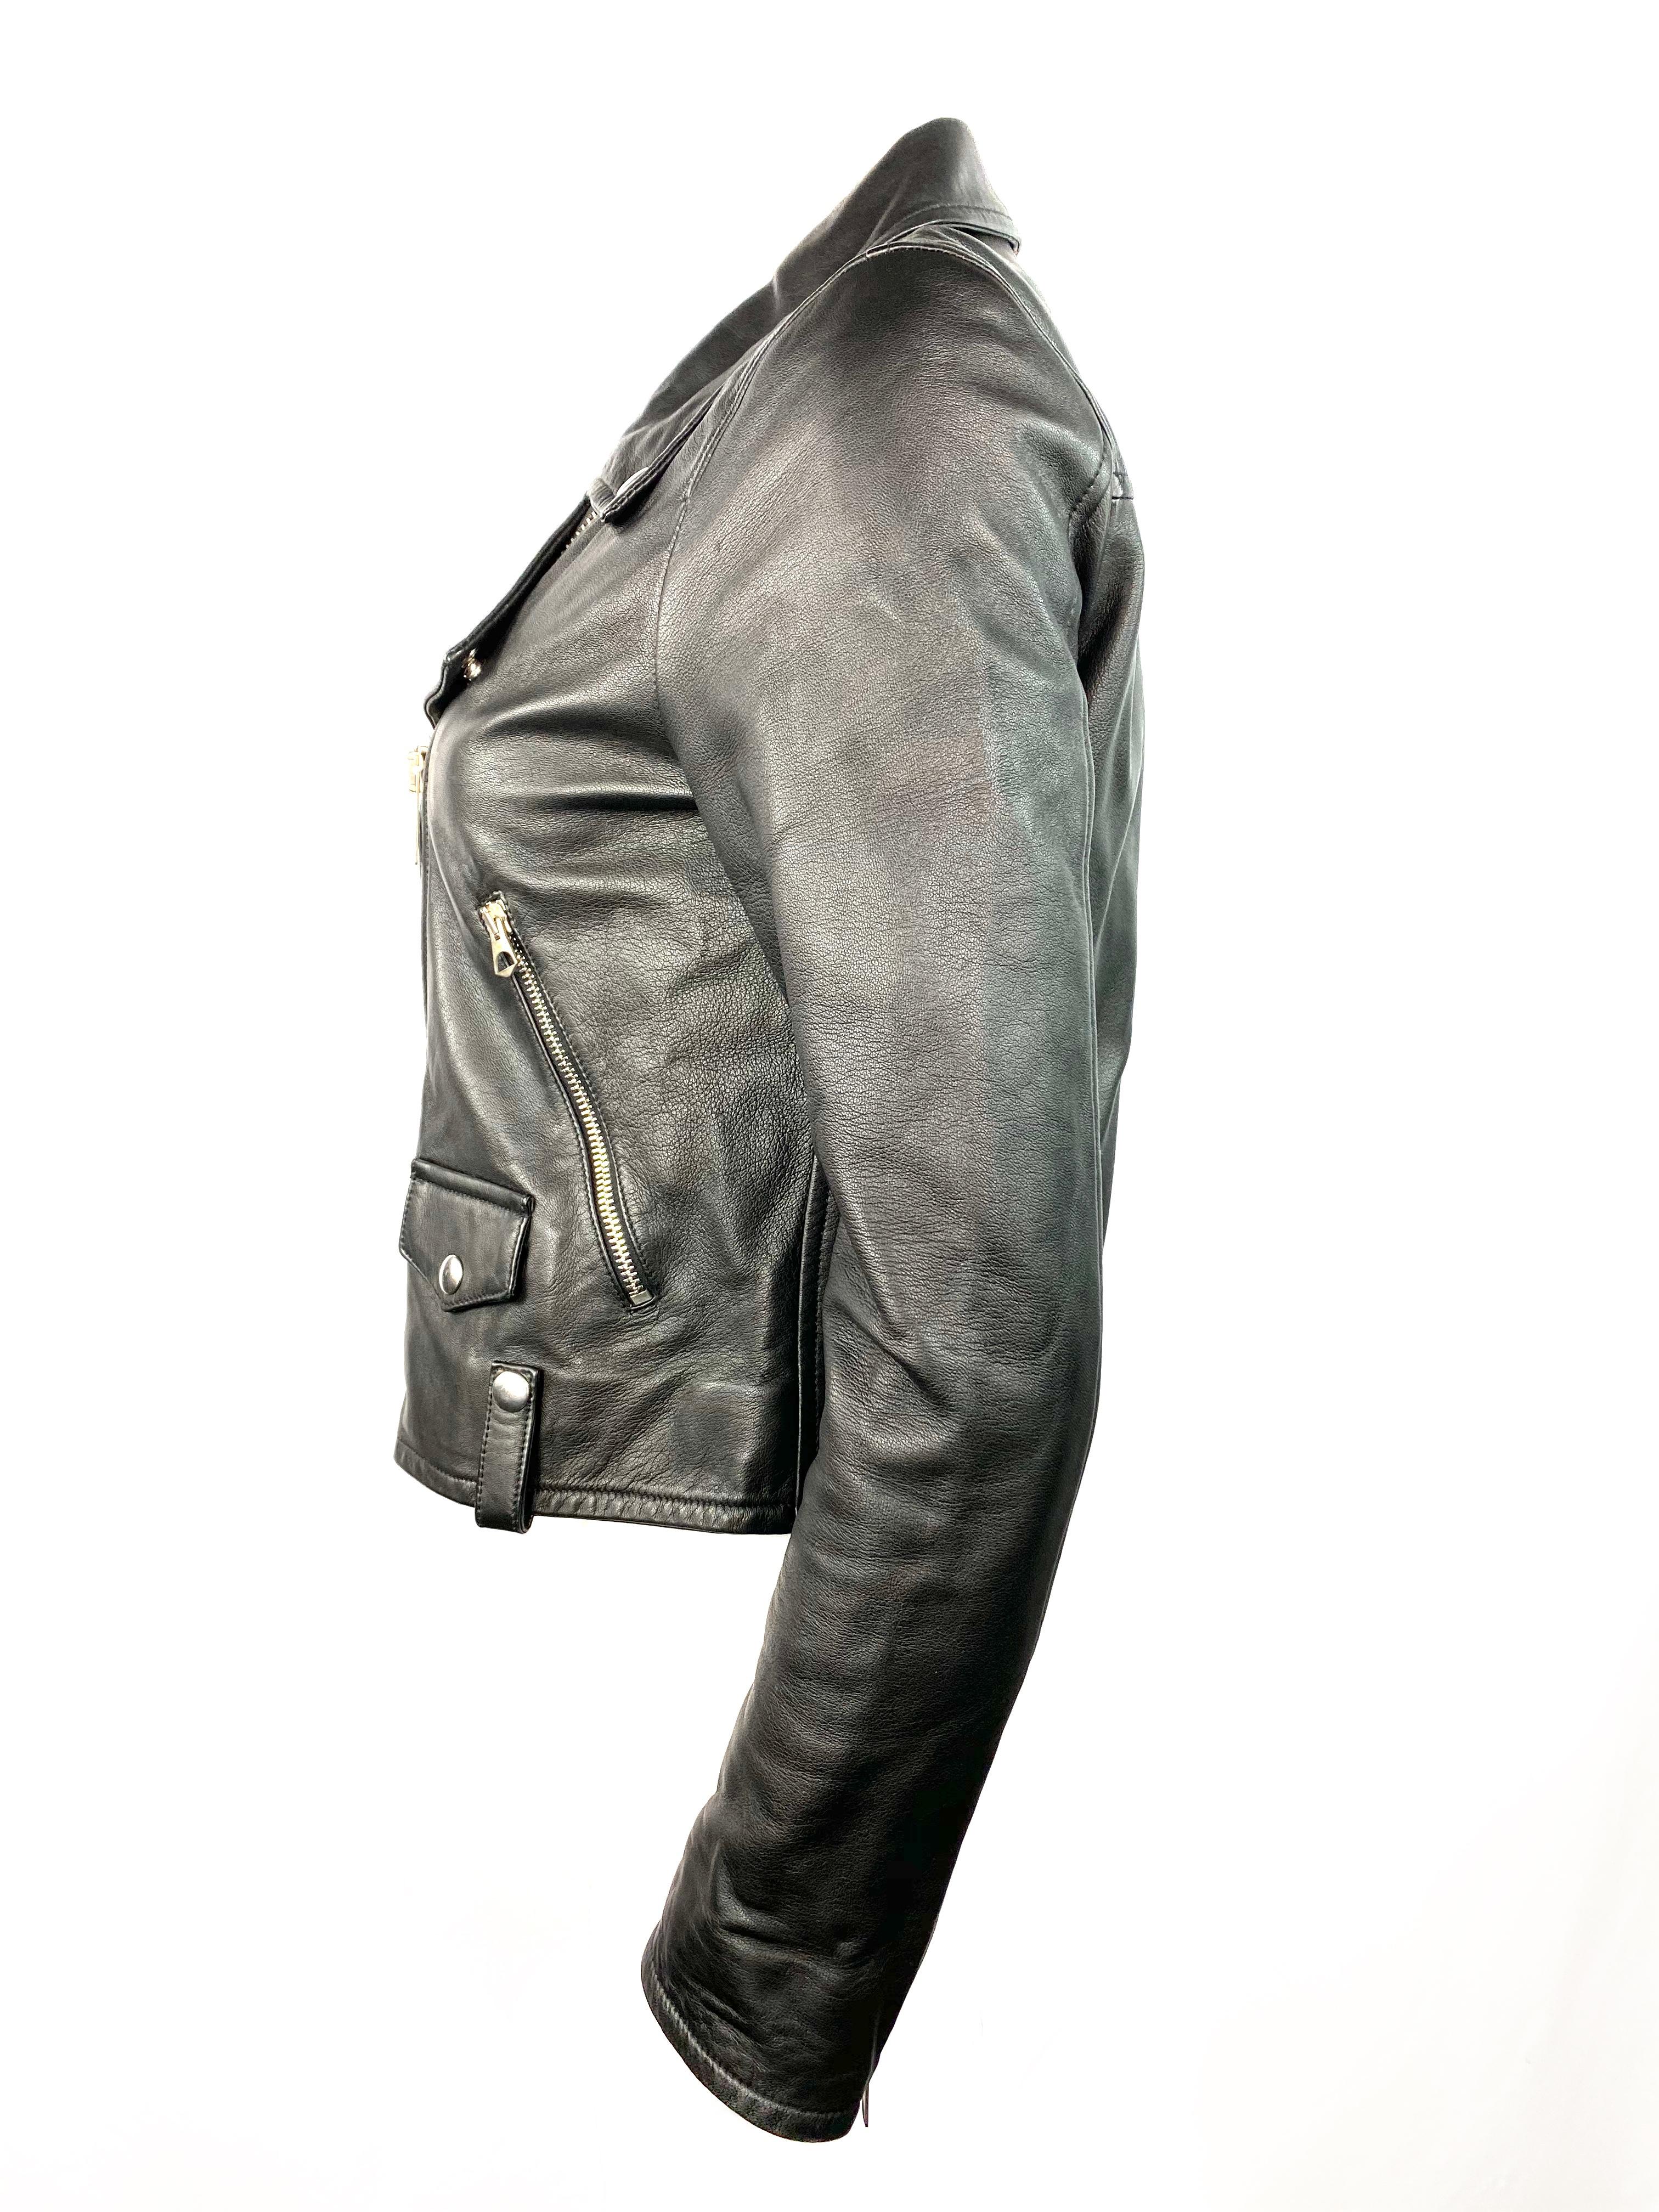 Women's or Men's Golden Goose Deluxe Brand Black Calf Leather Jacket Size M For Sale